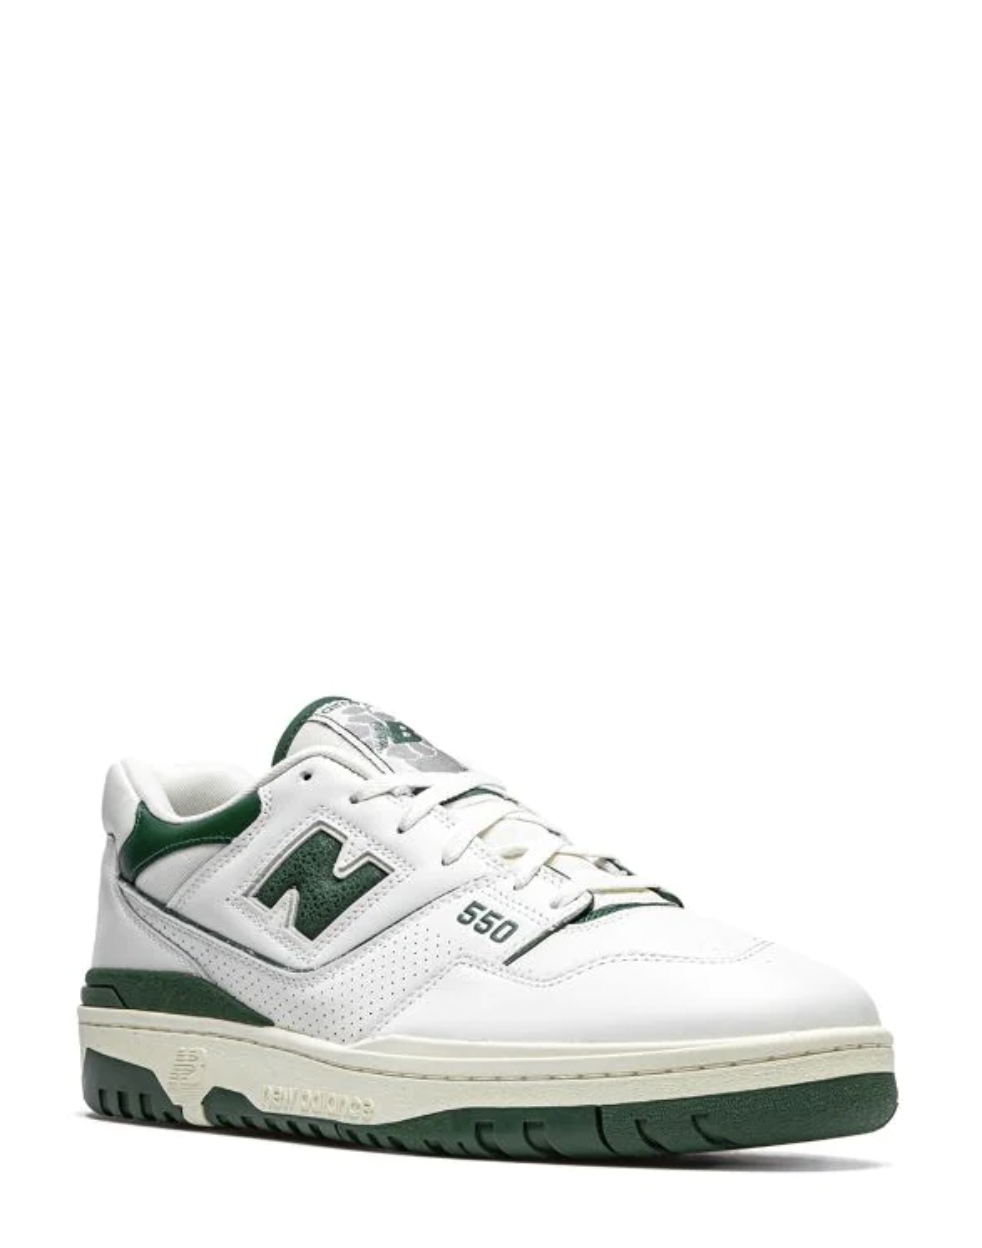 New Balance 550s in green